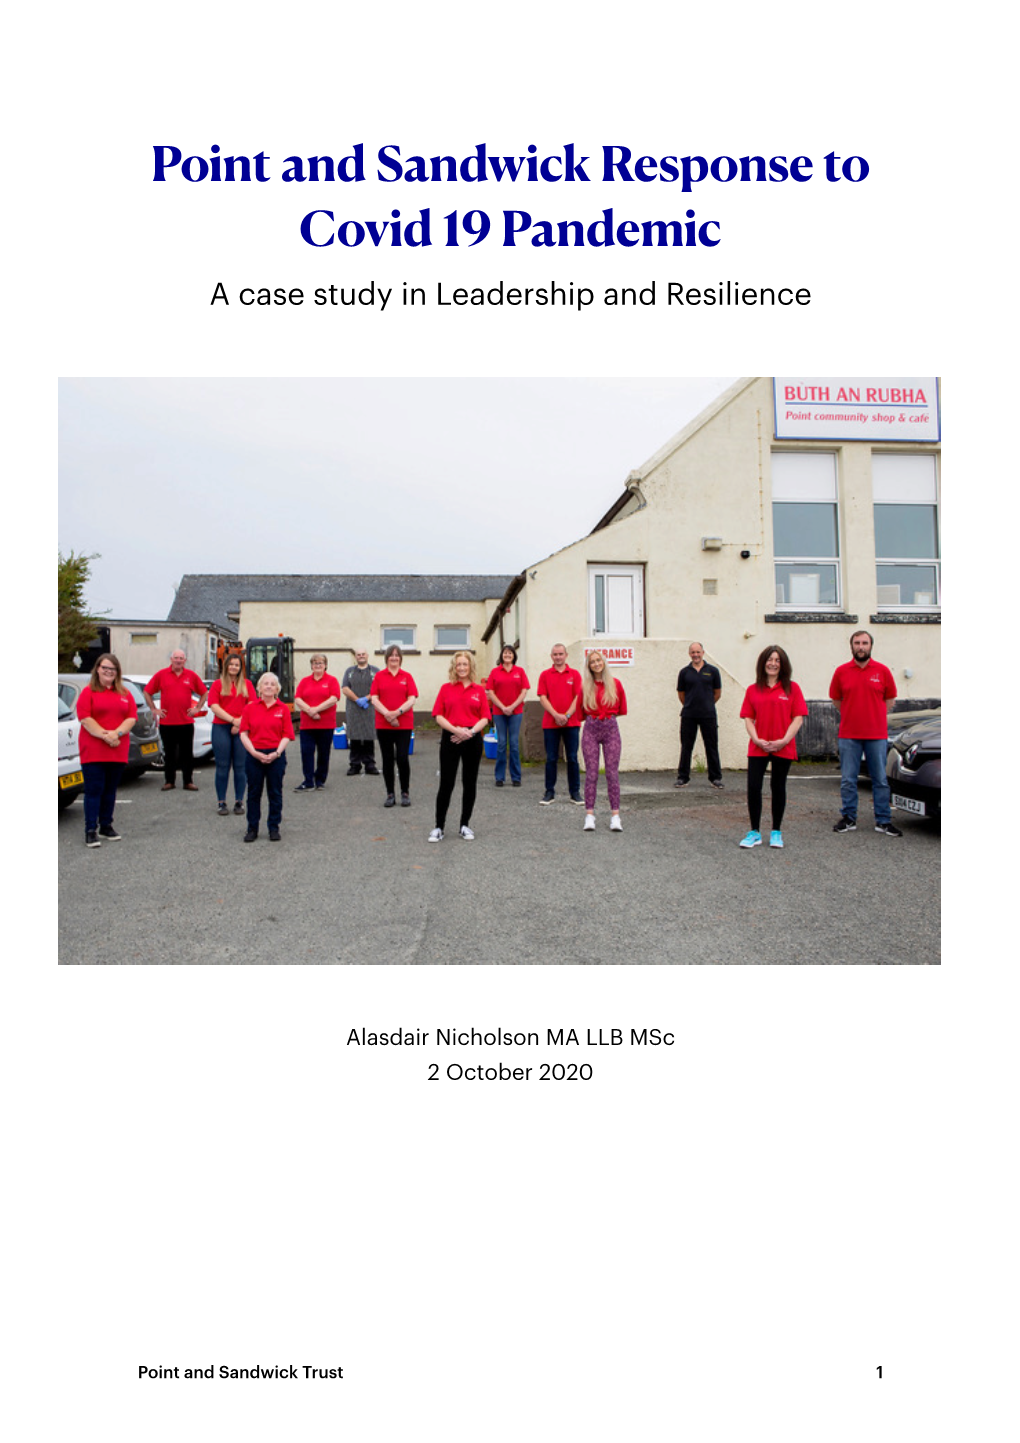 Point and Sandwick Response to Covid 19 Pandemic Copy